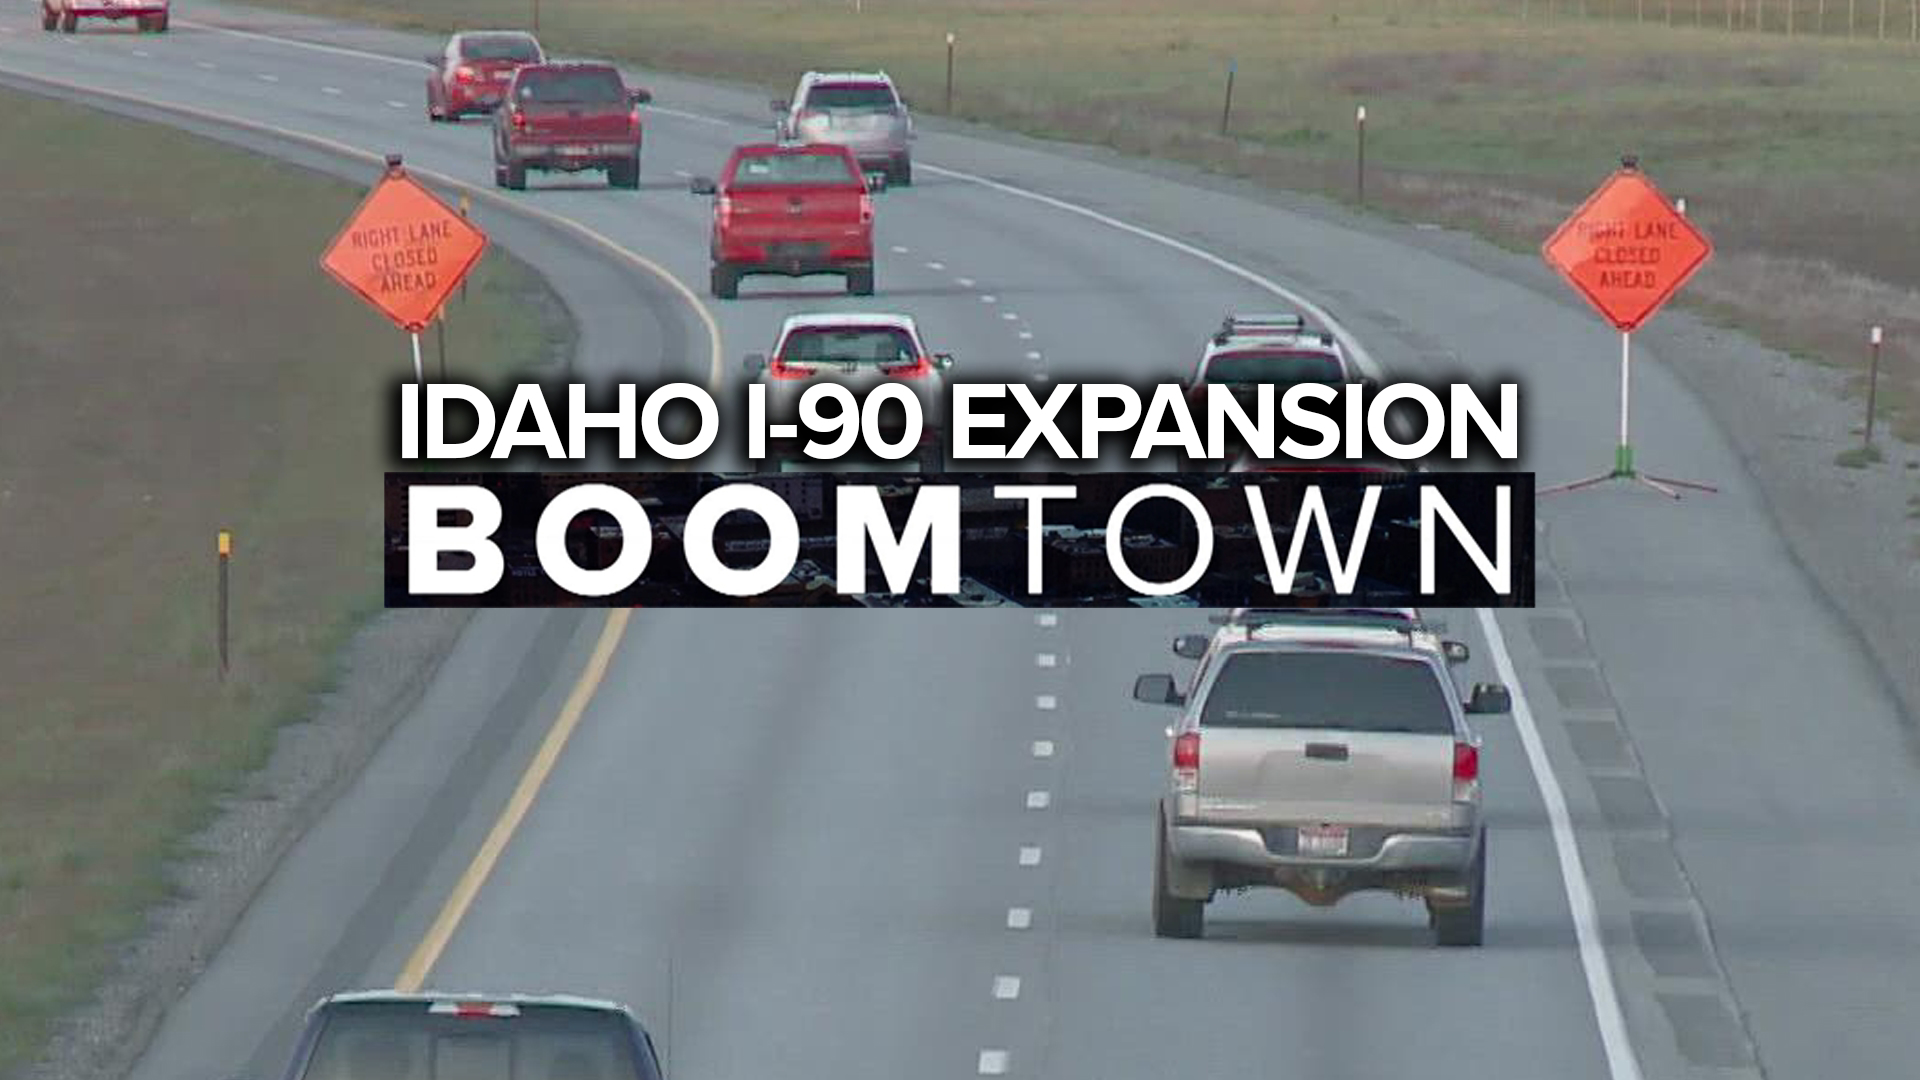 In less than 30 years, the traffic volume is expected to double, causing concern for residents in North Idaho.